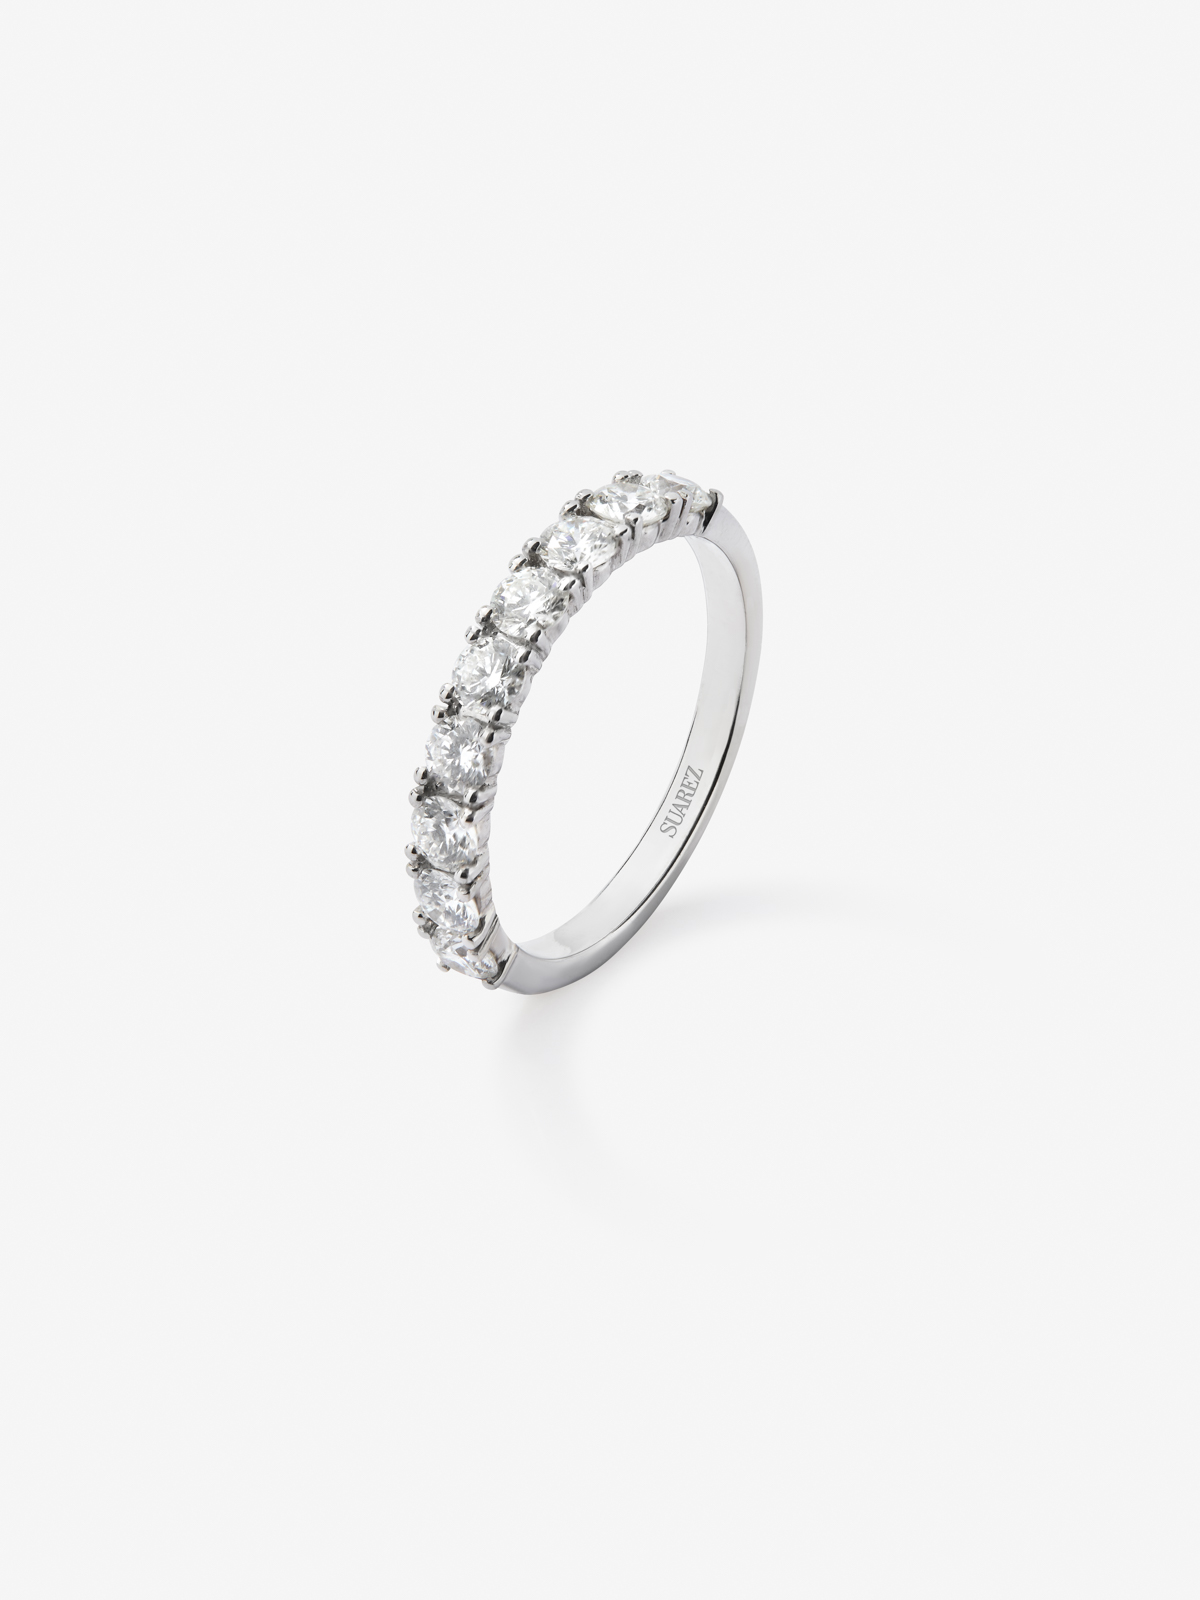 18K white gold engagement ring with diamonds